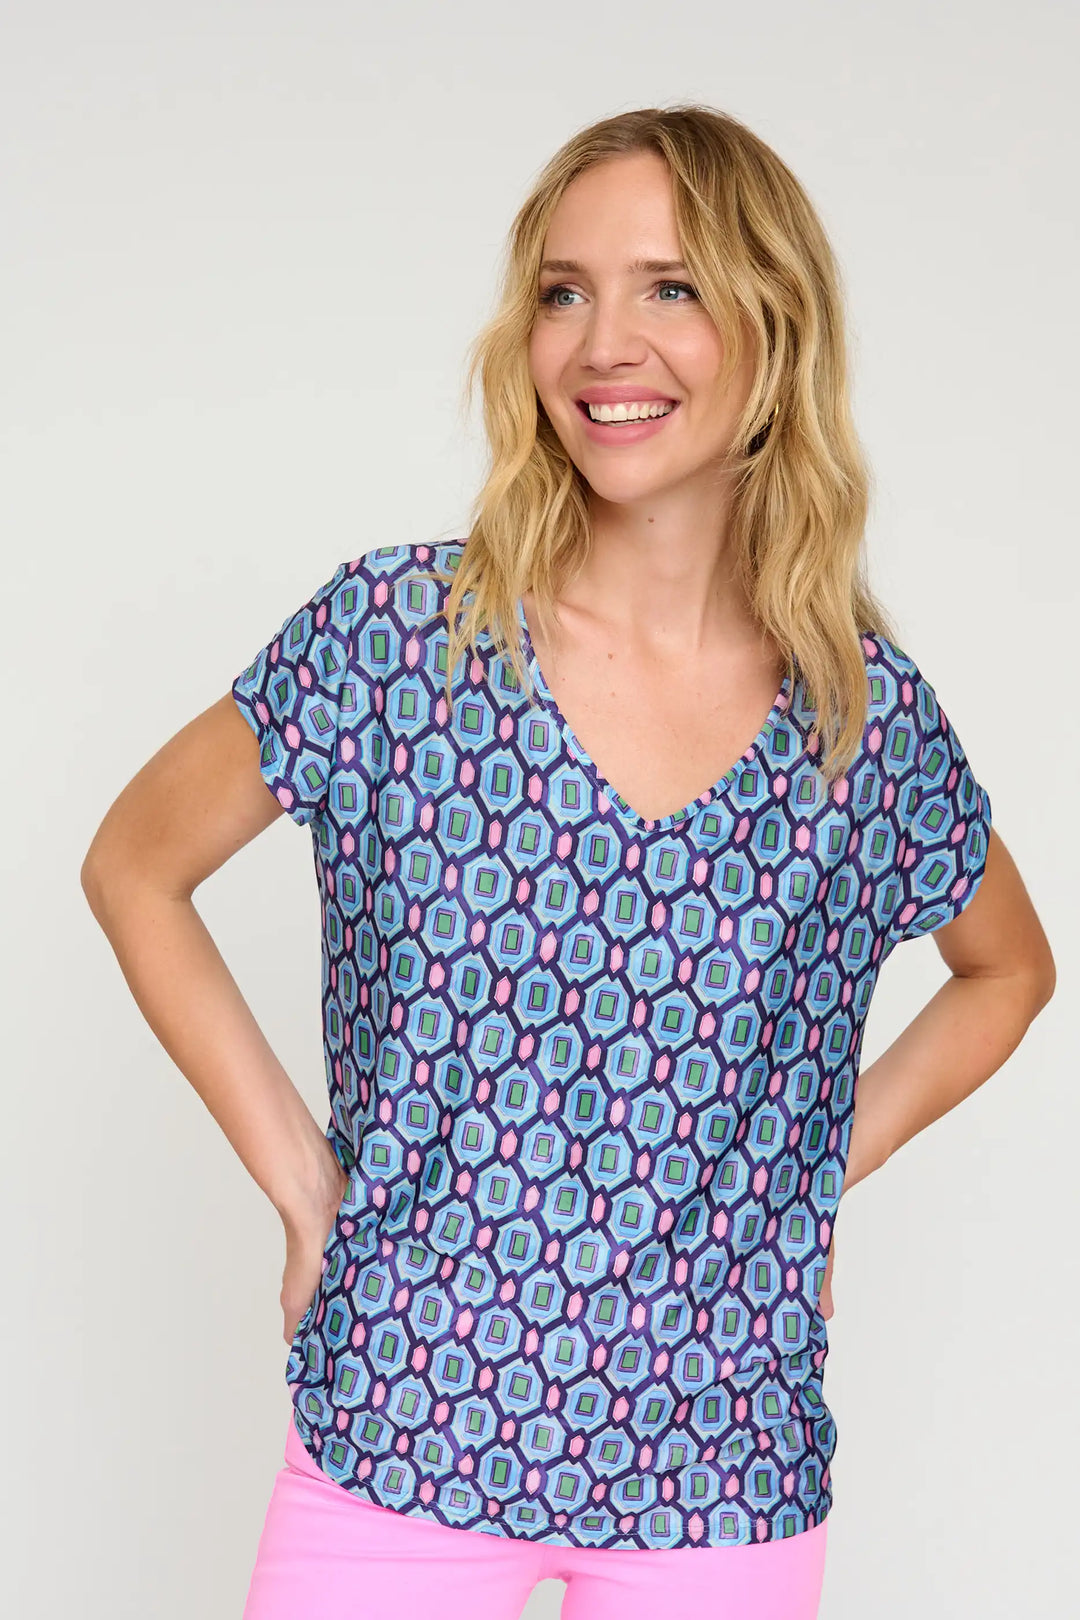 Model wearing the 'Saberina24' style blouse, with a blue and pink geometric print, V-neck, and short sleeves, complemented by pink trousers.